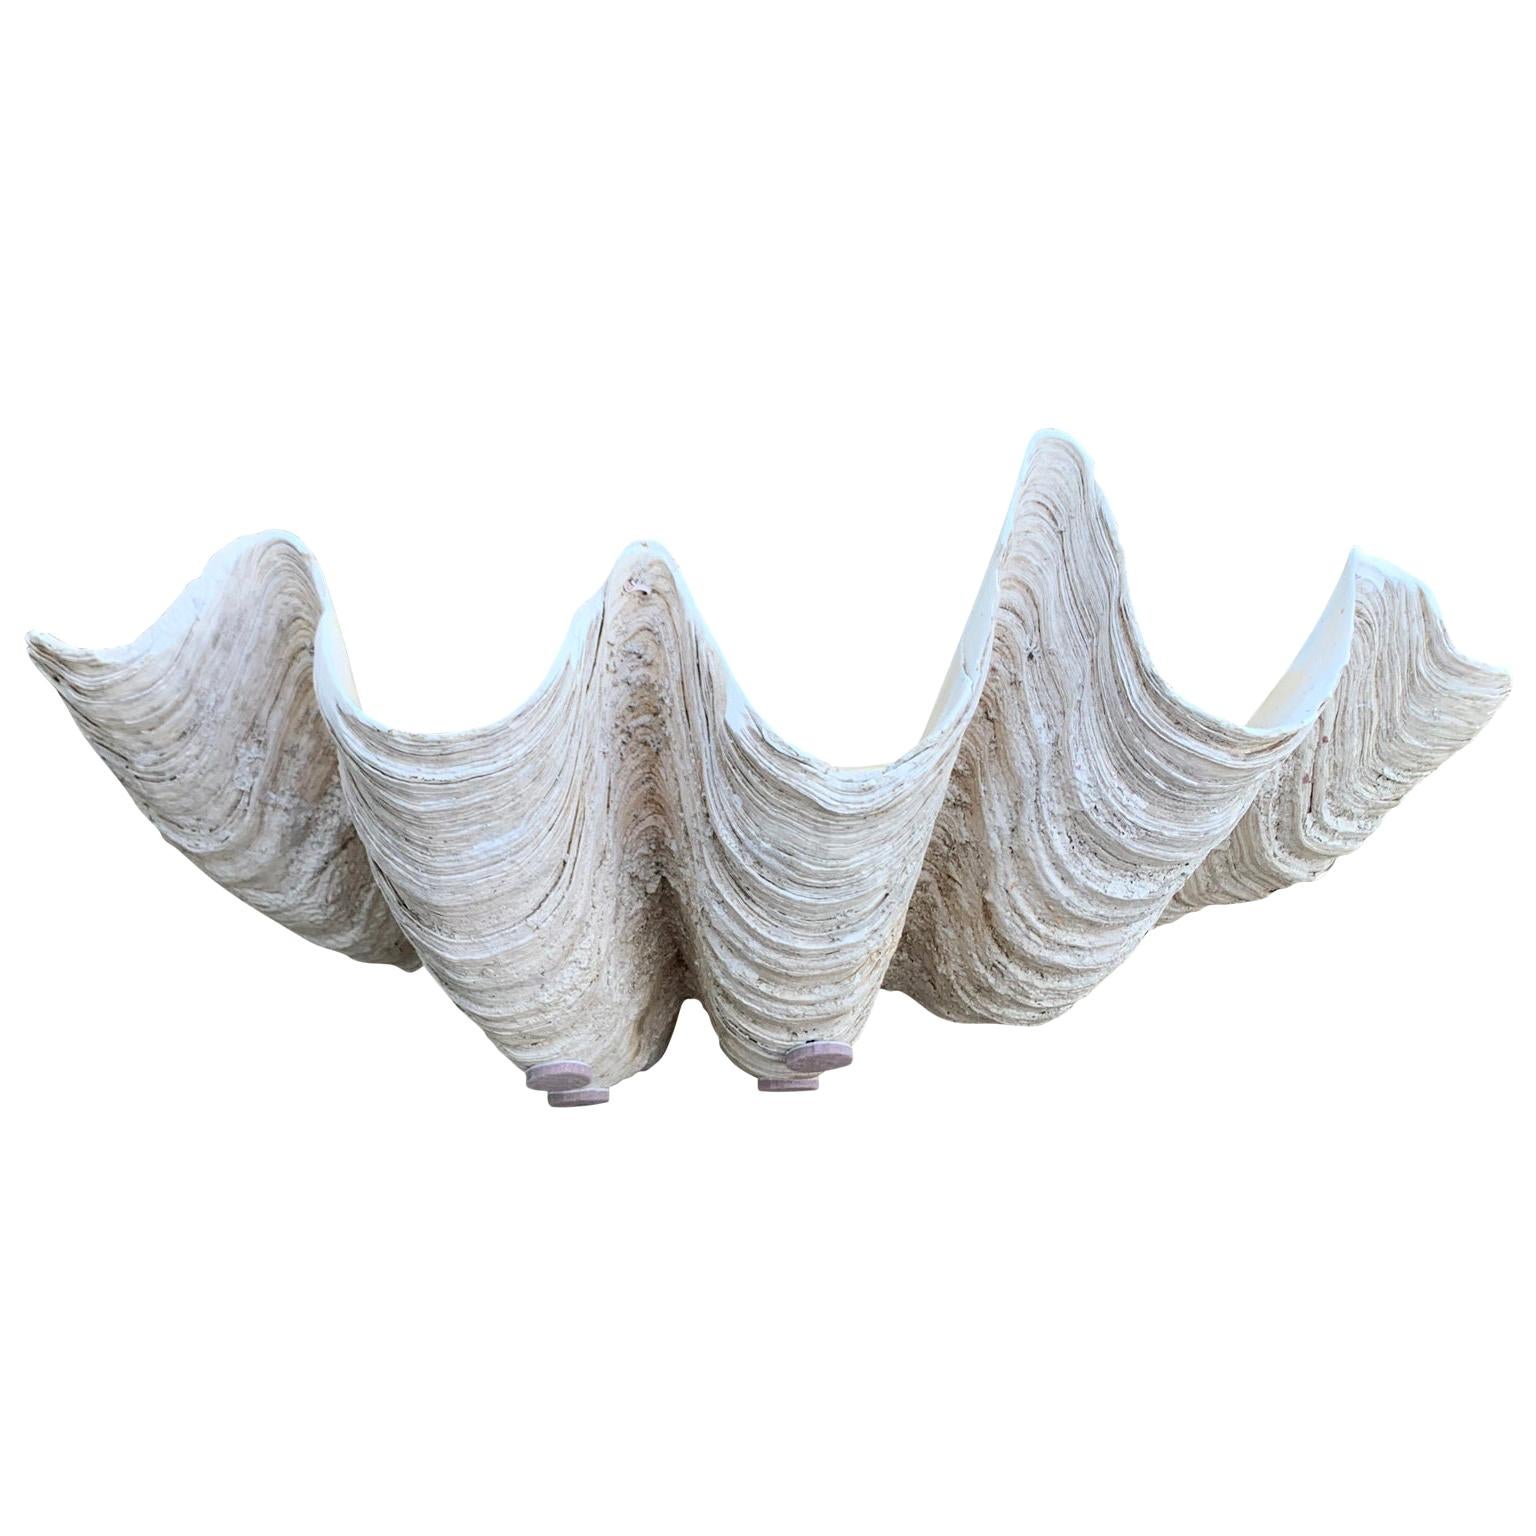 Mid Size South Pacific Tridacna Gigas Clam Shell with High Elbows